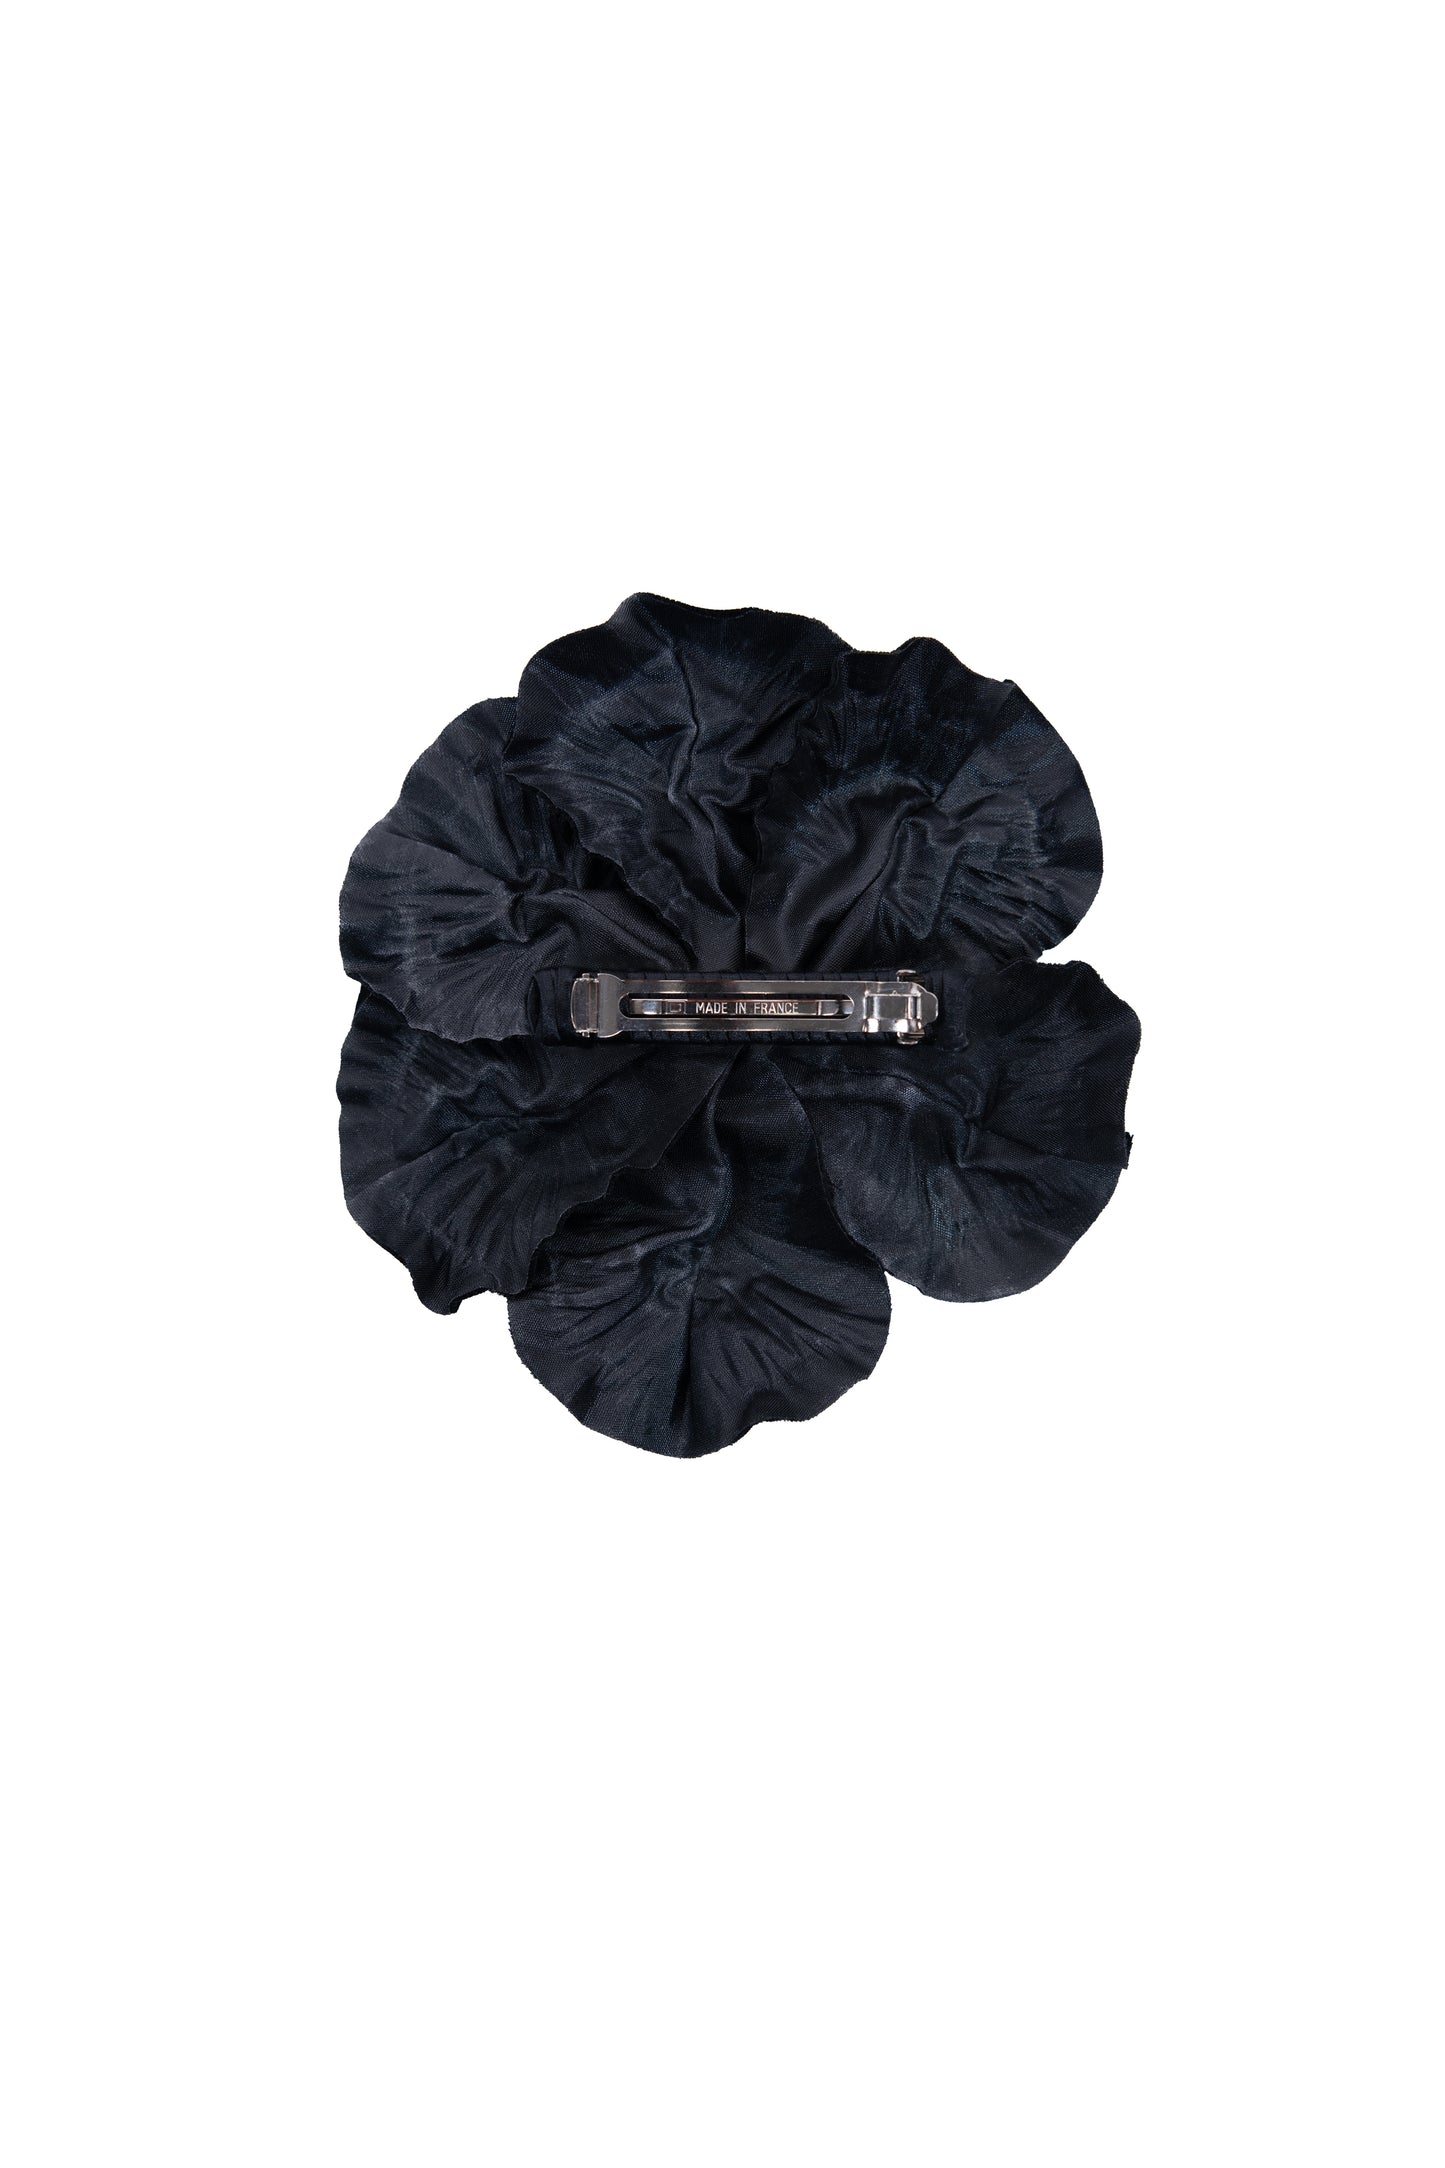 The Irish Twin - Anemone flower claw clip for hair - black velvet fabric - emerald cut crystal embroidered - Made in France - Made in Paris - Handmade in Paris - Designed in Paris - Handcrafted - Be my Guest - Made to love and to last - Unique piece made by hand - original and special for Host Wear by The Irish Twin - created by Jill Bauwens